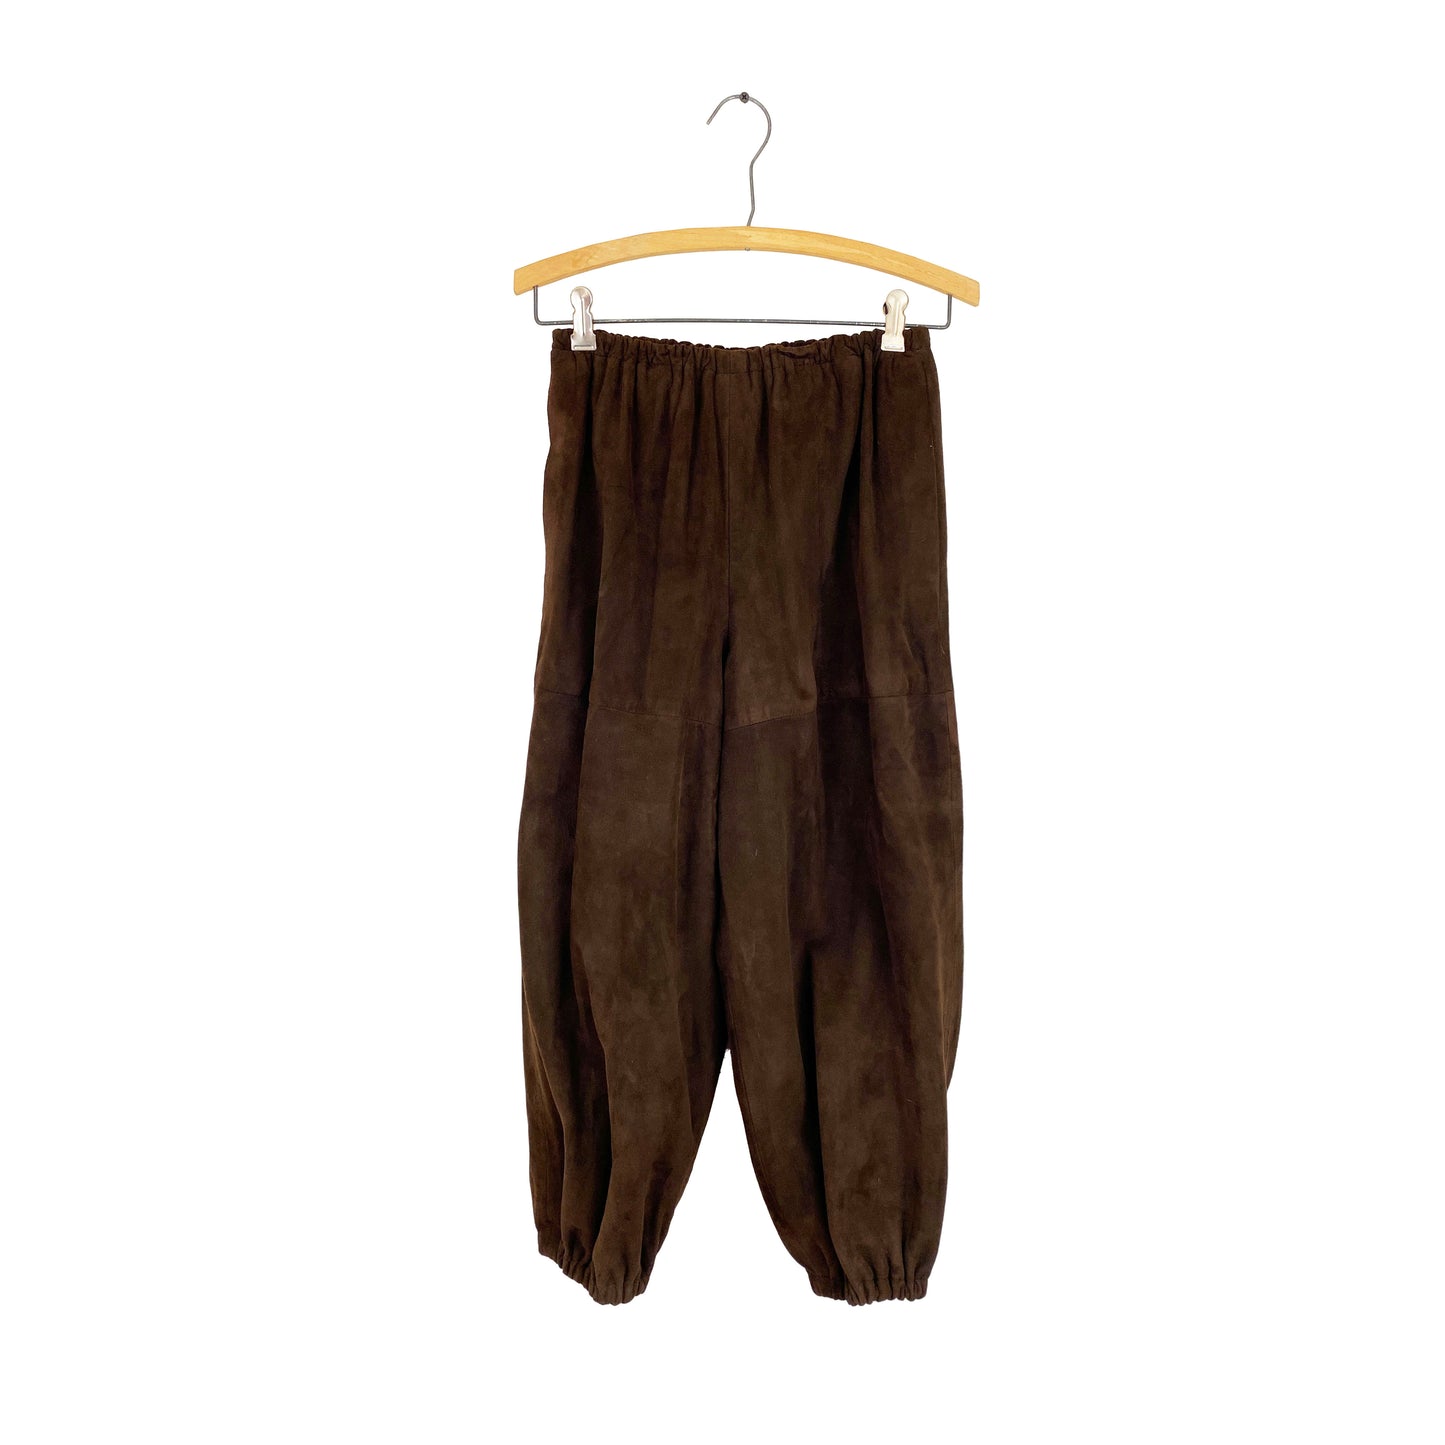 1960-1970s Bonnie Cashin Sills Brown Suede Knickers or Balloon Pants Elastic Waist / Size M/L